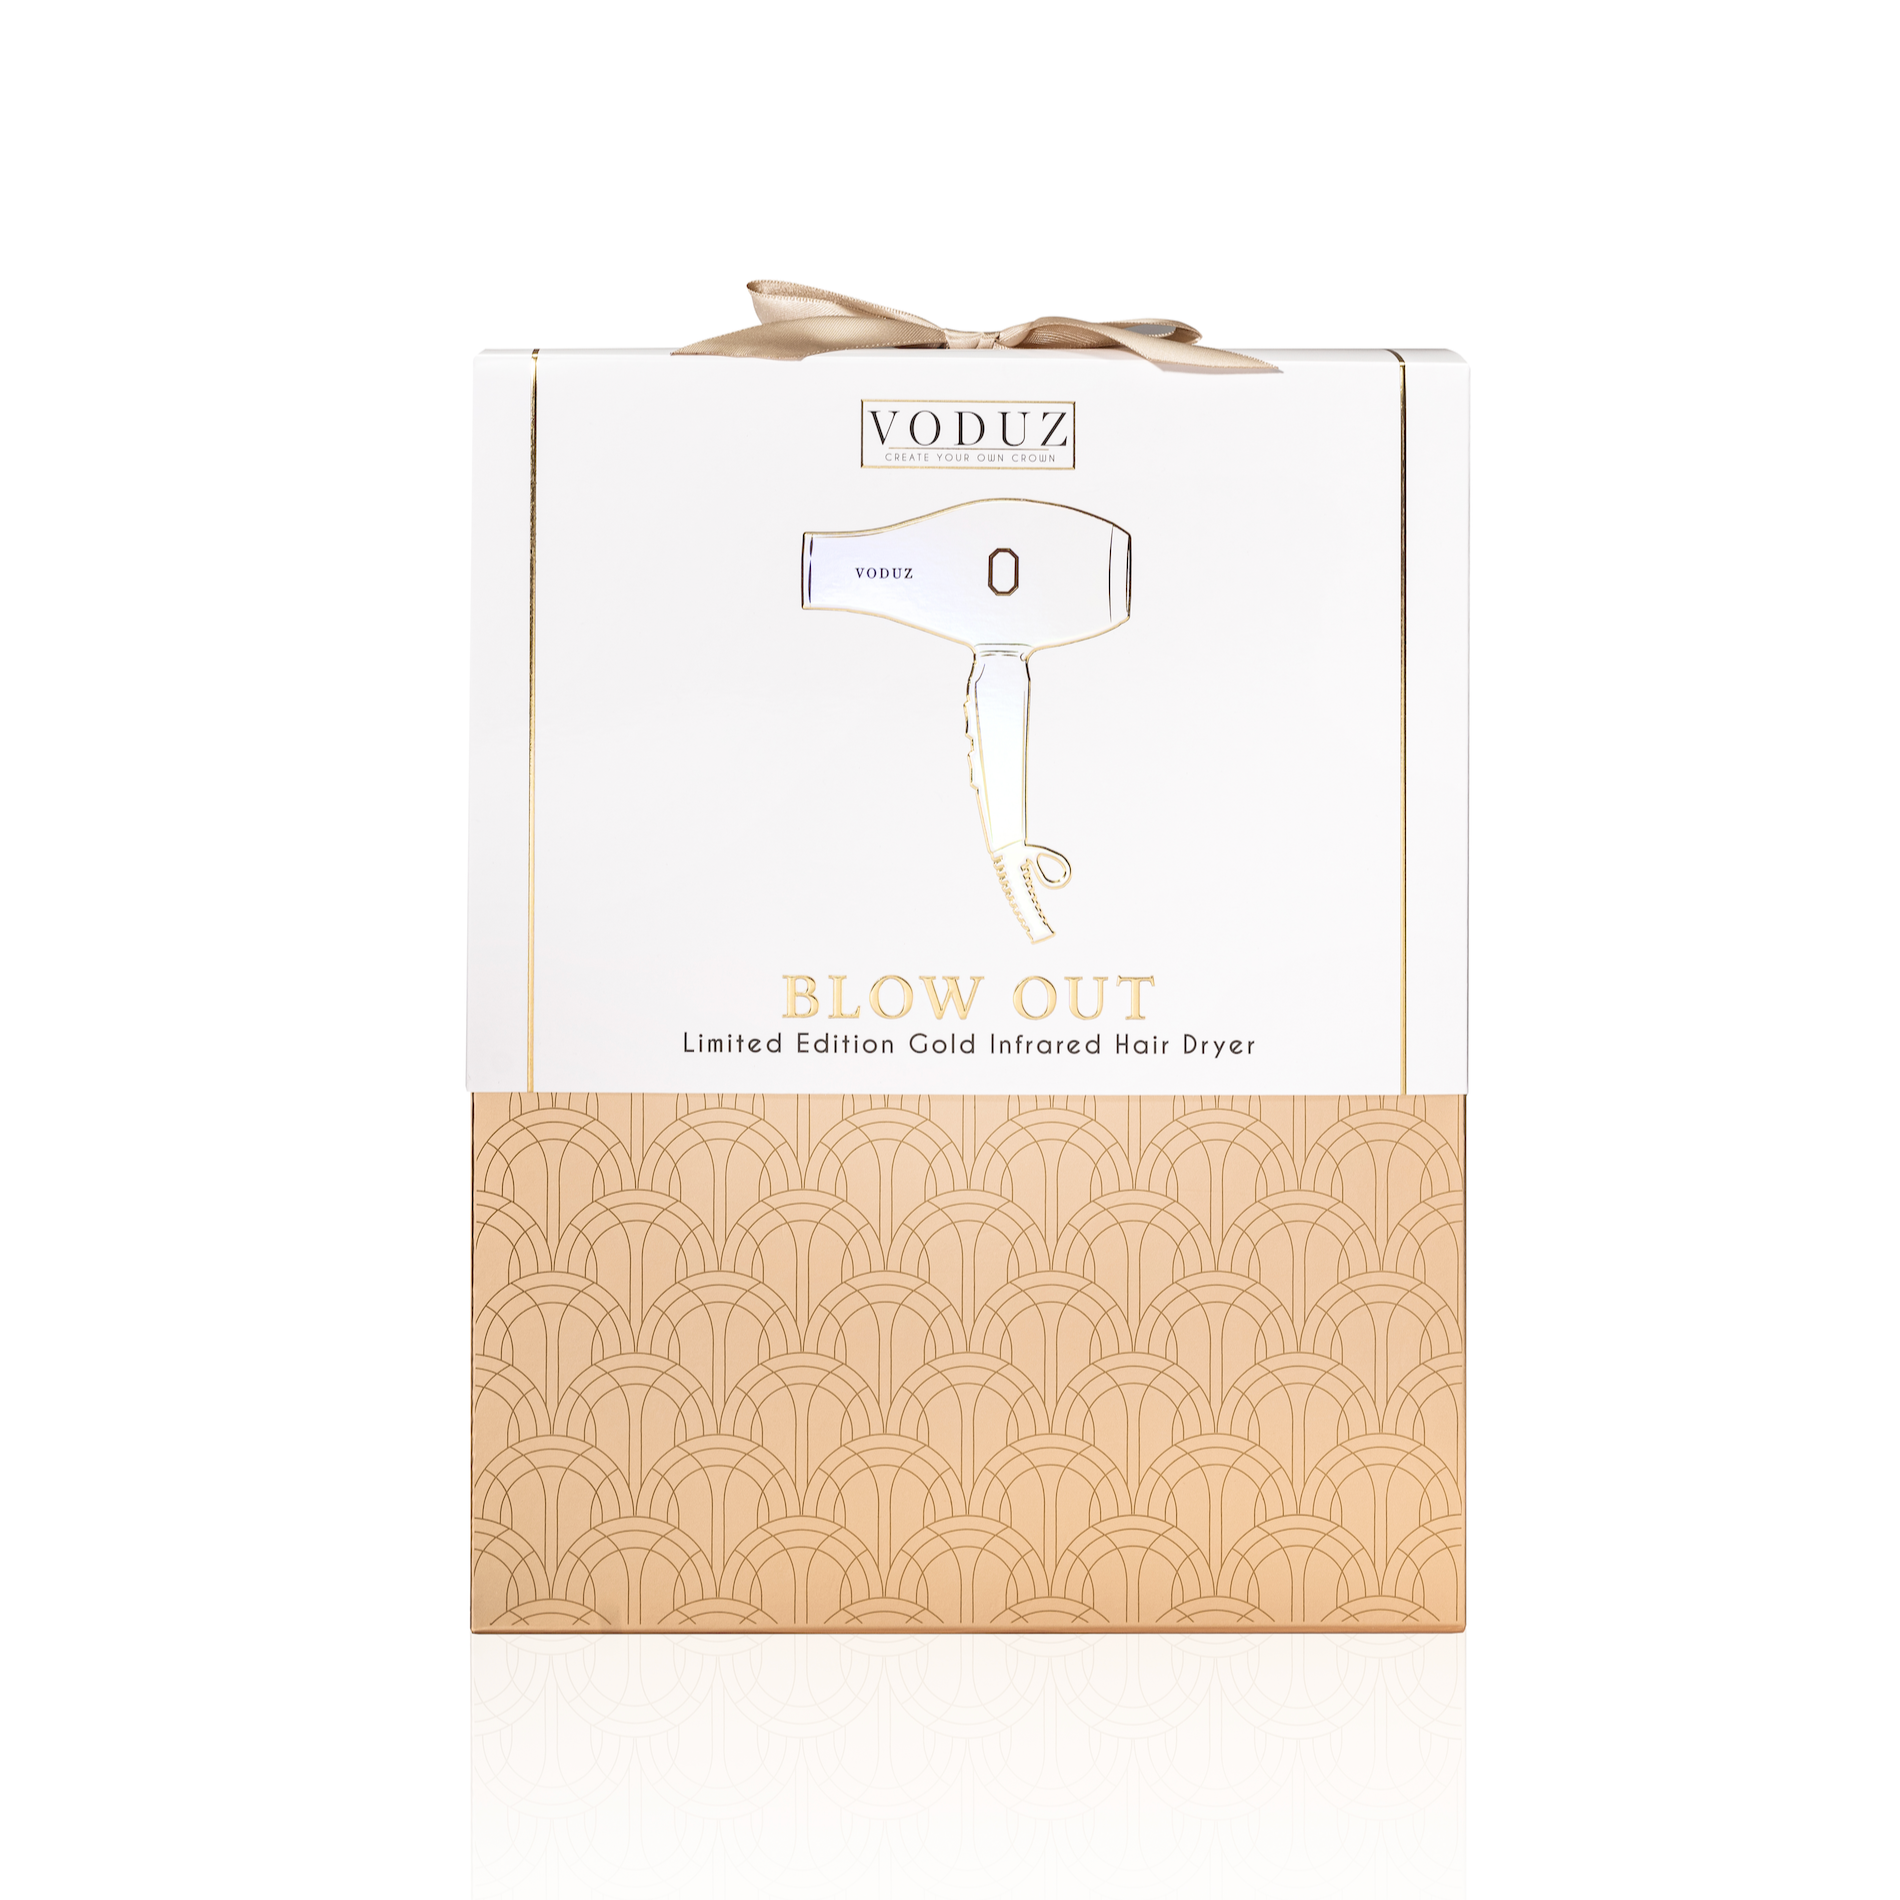 Voduz Blow Out Infrared Hair Dryer - Limited Edition Gold, gold [packaging